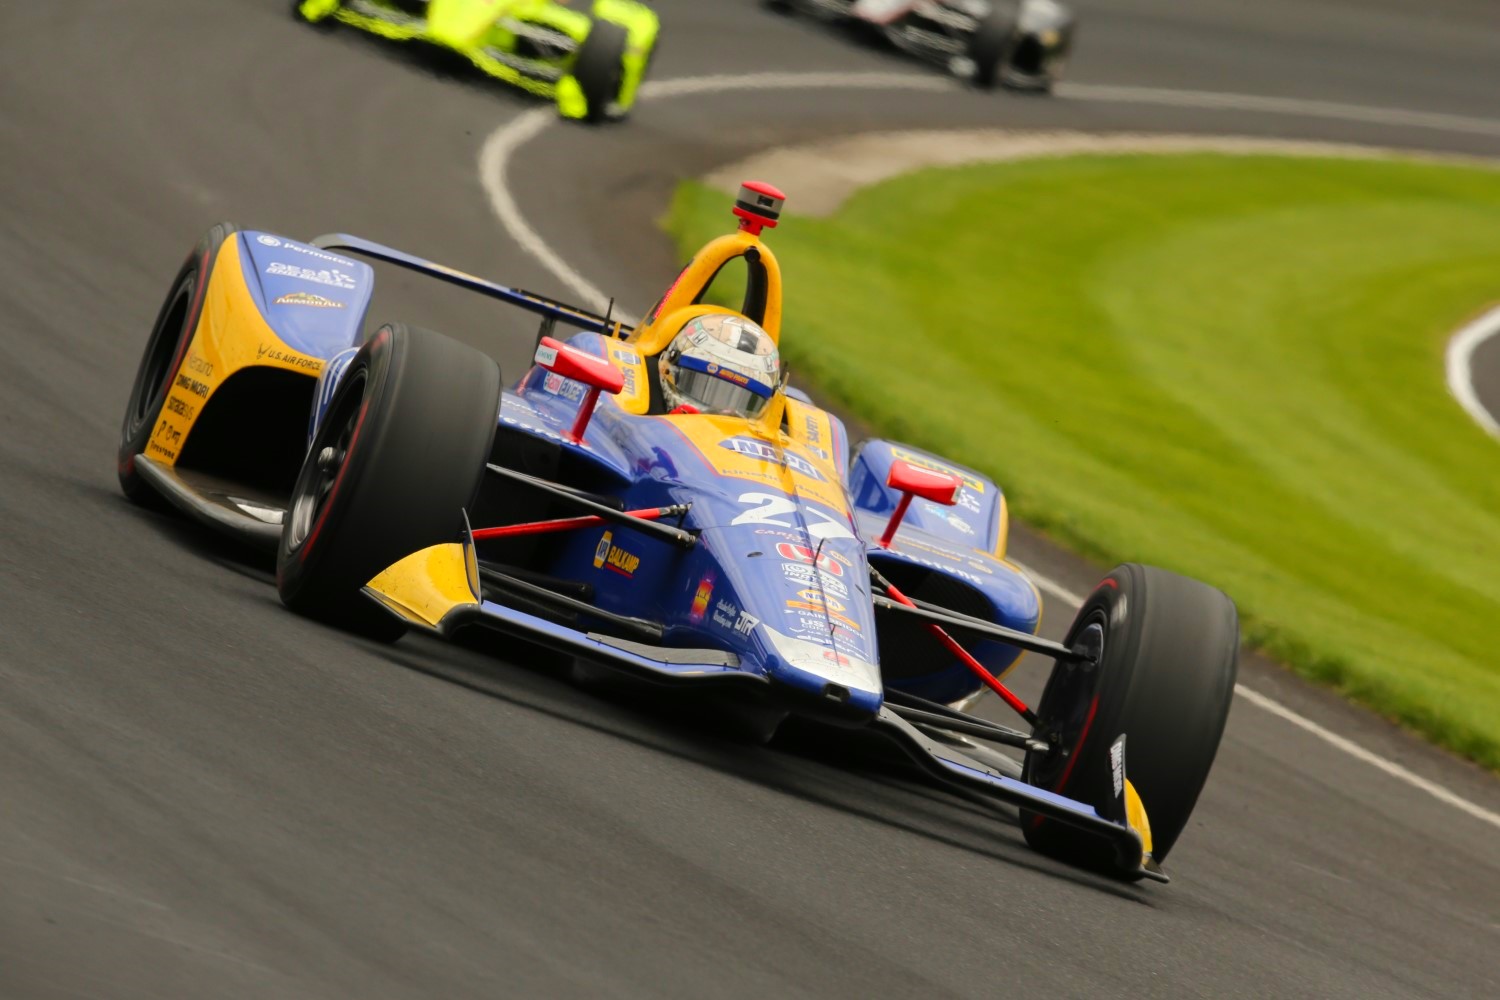 Can Alexander Rossi and Andretti Autosport reverse the thorough thumping the got last year by Team Penske?